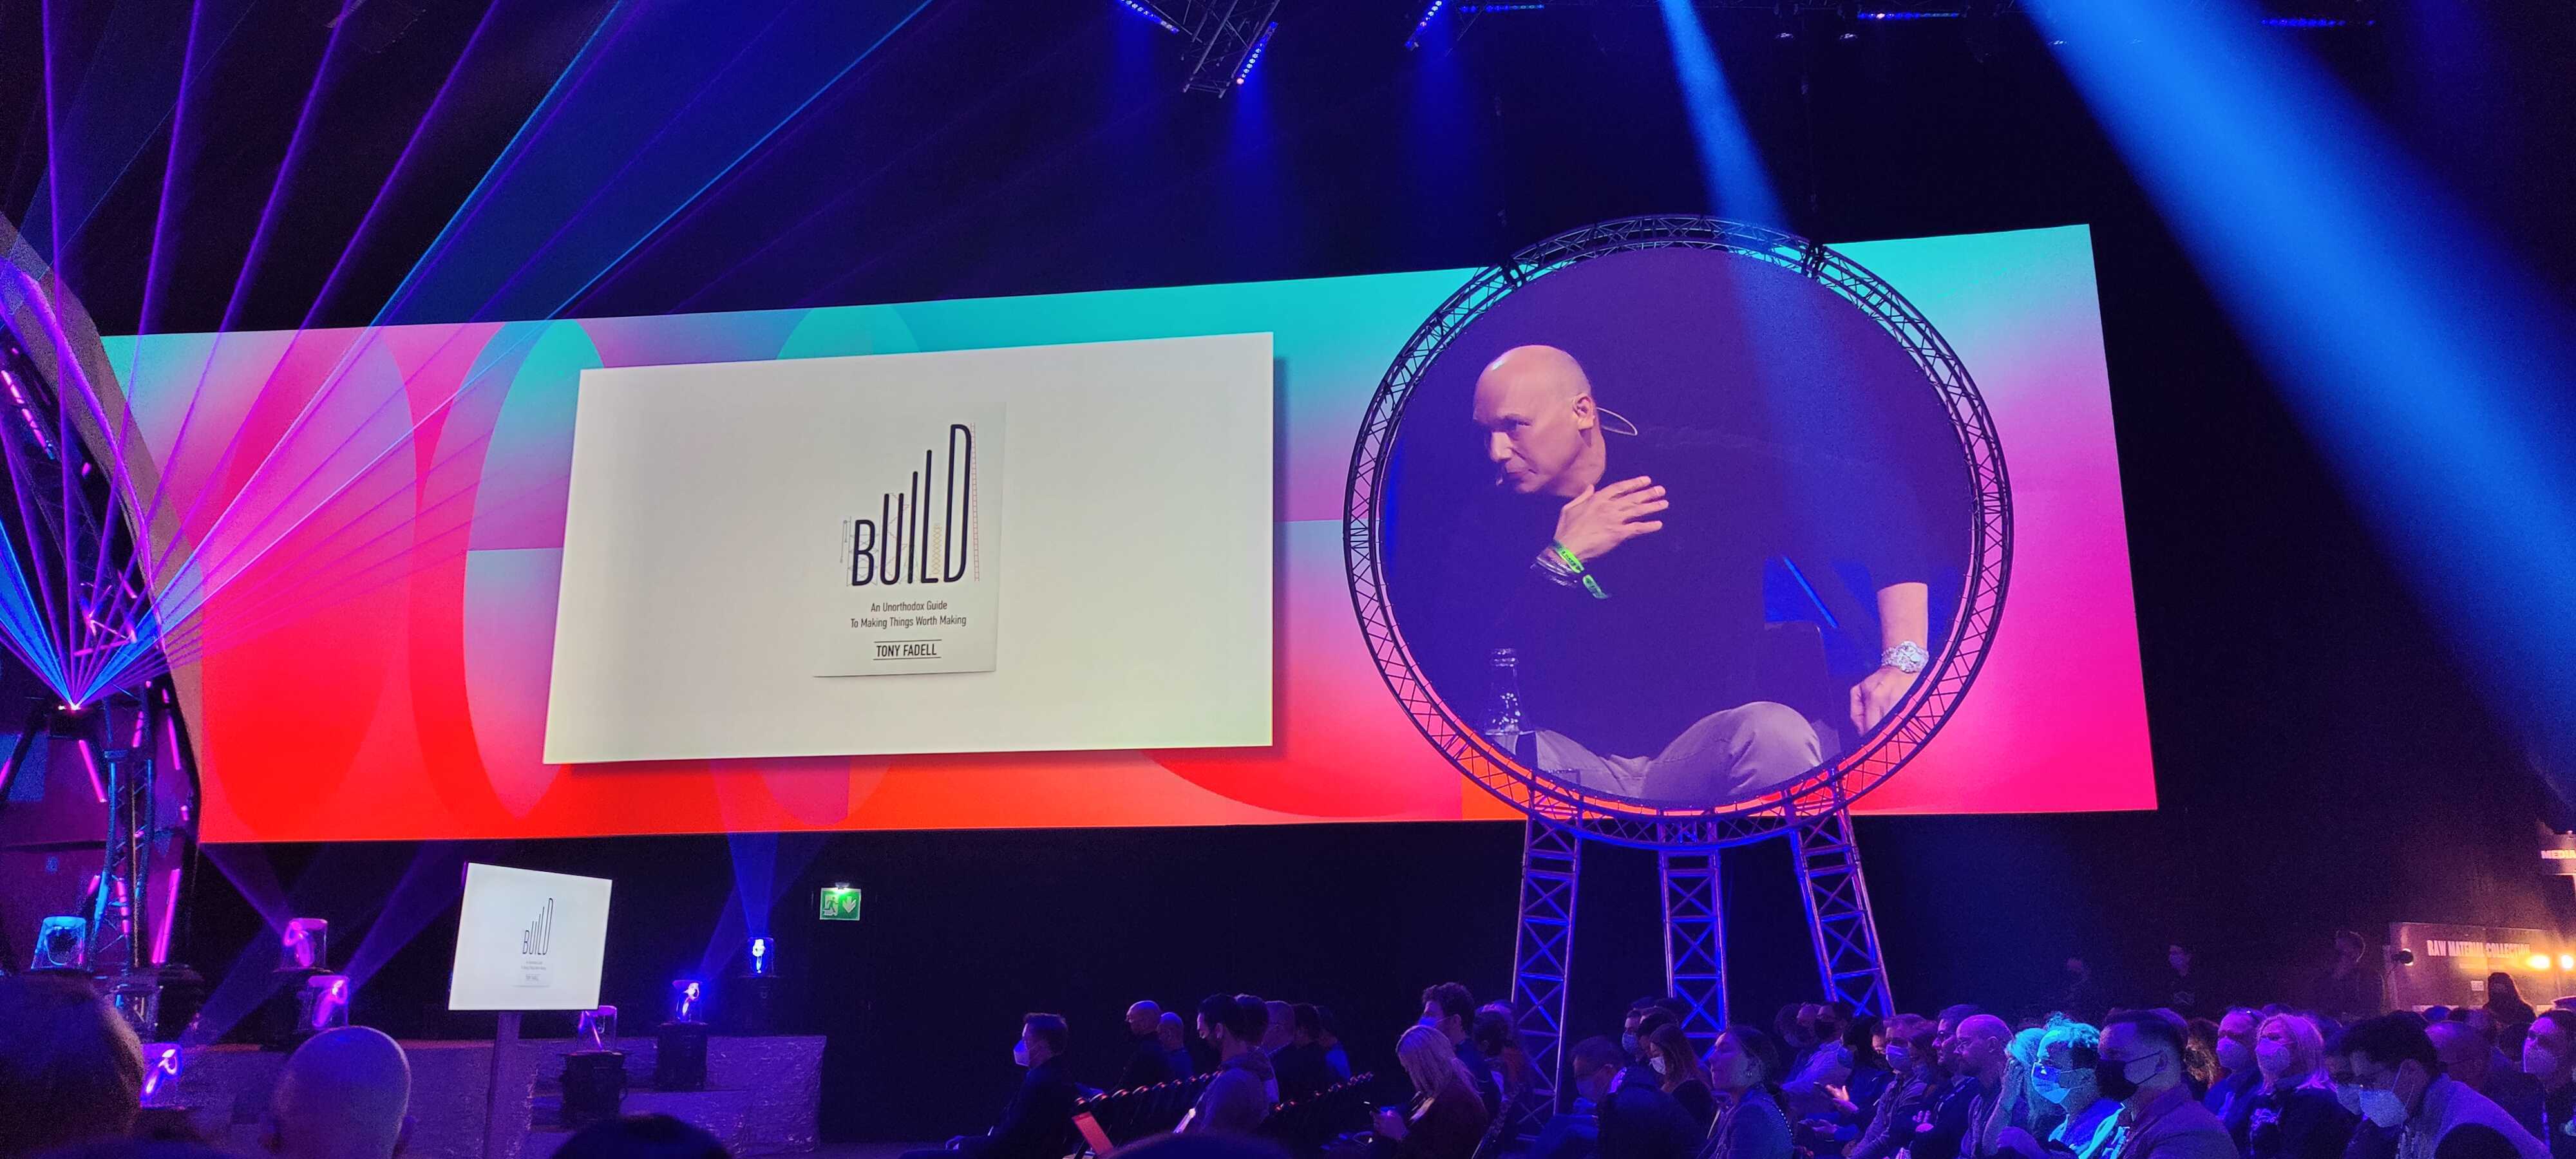 Slush 2021 live blog: all the latest updates from the startup conference